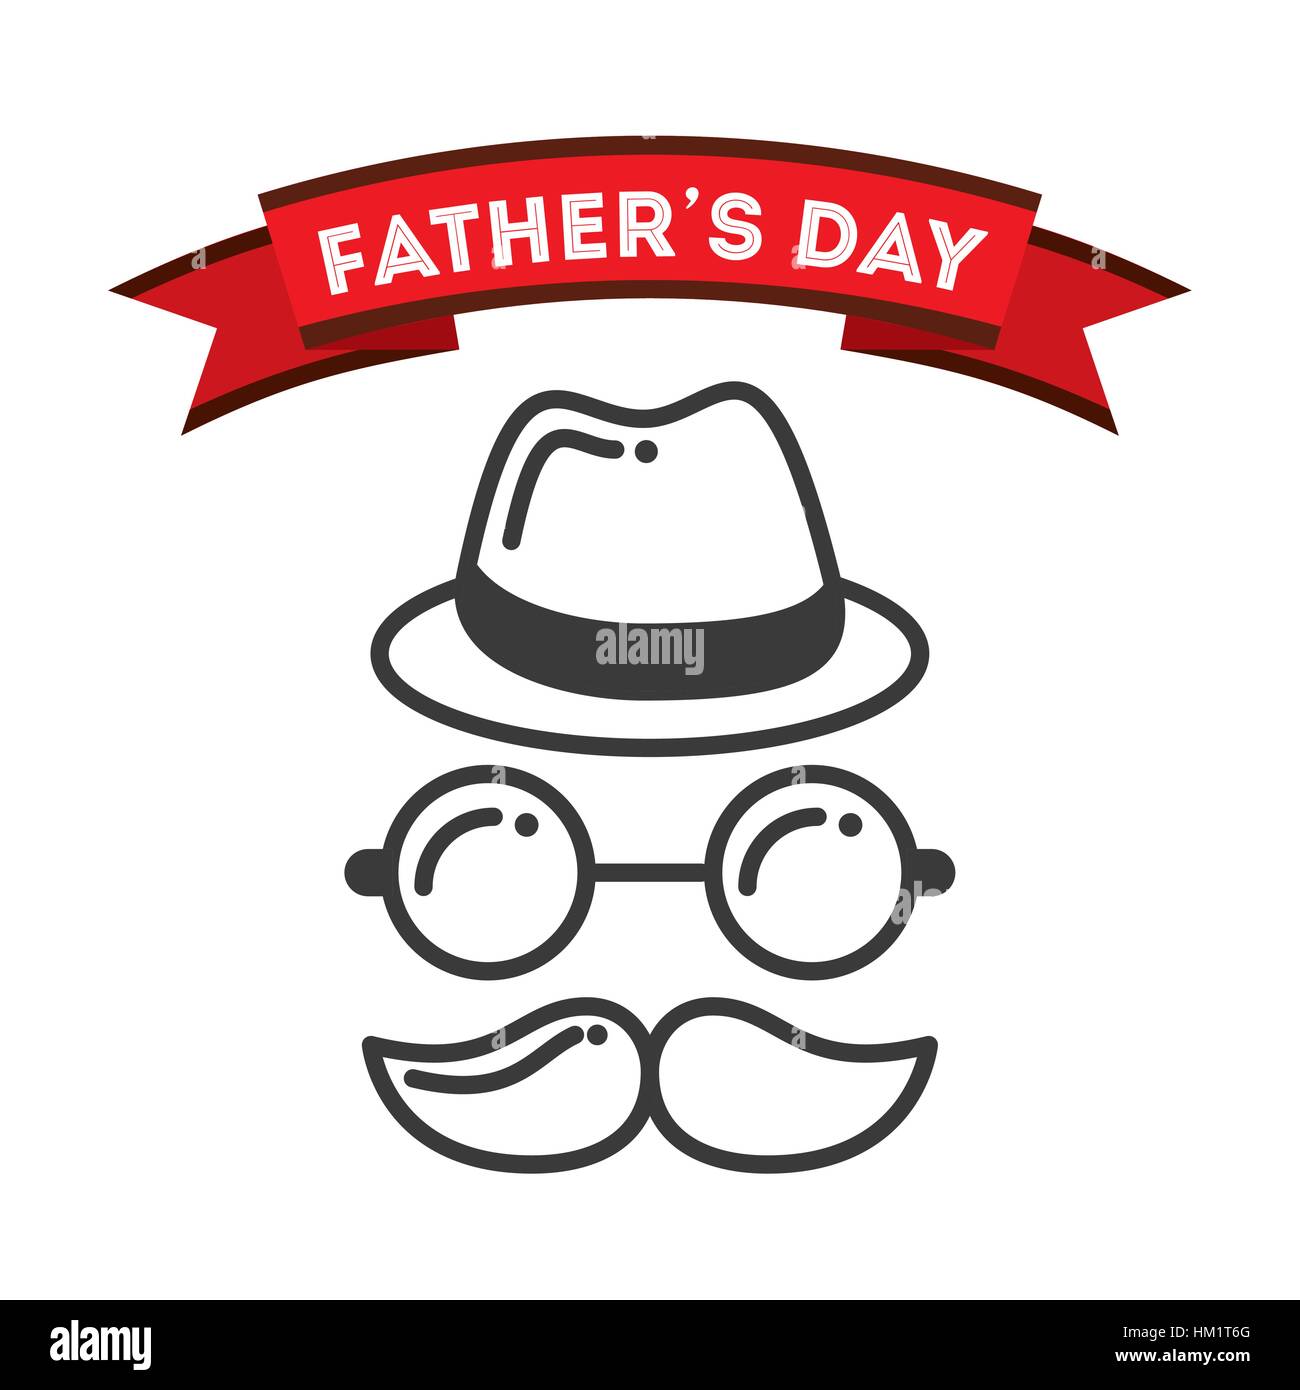 Free Vector  Happy fathers day cap and spectacles on mustache